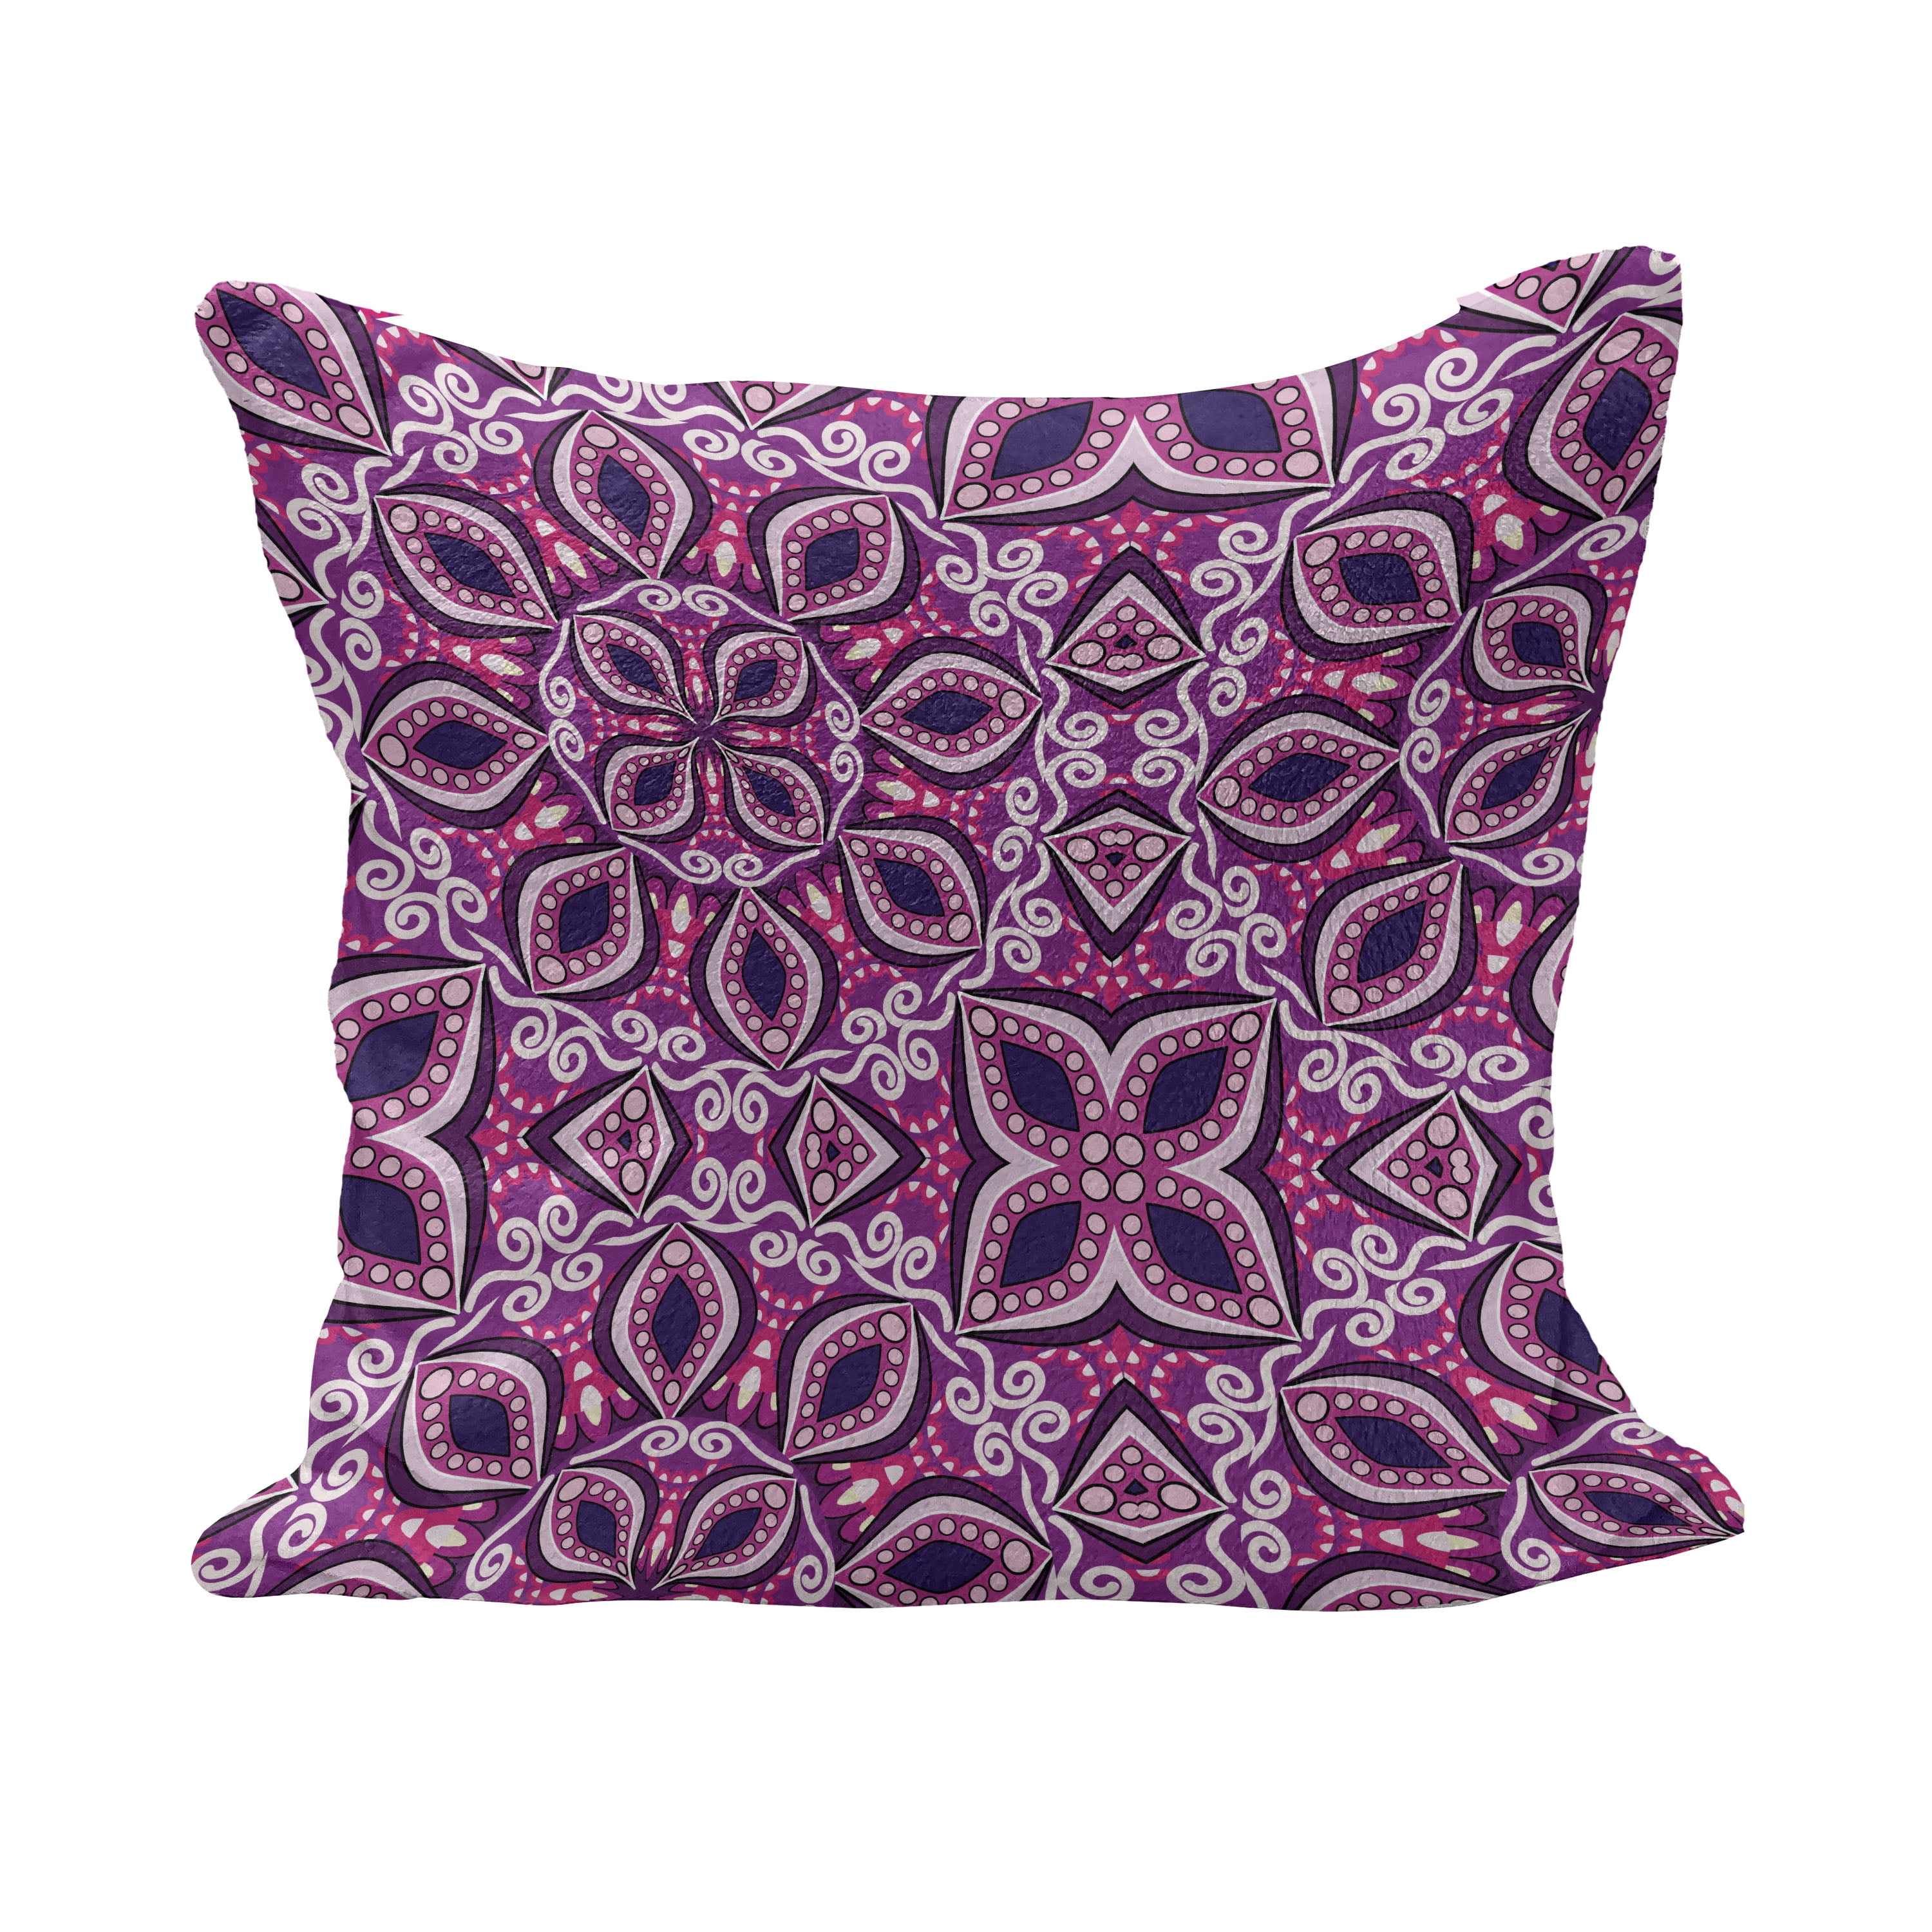 fuchsia pillow with tree slice design country chic home decor pillow cover and insert home accent pillow Pink pillow farmhouse pillow